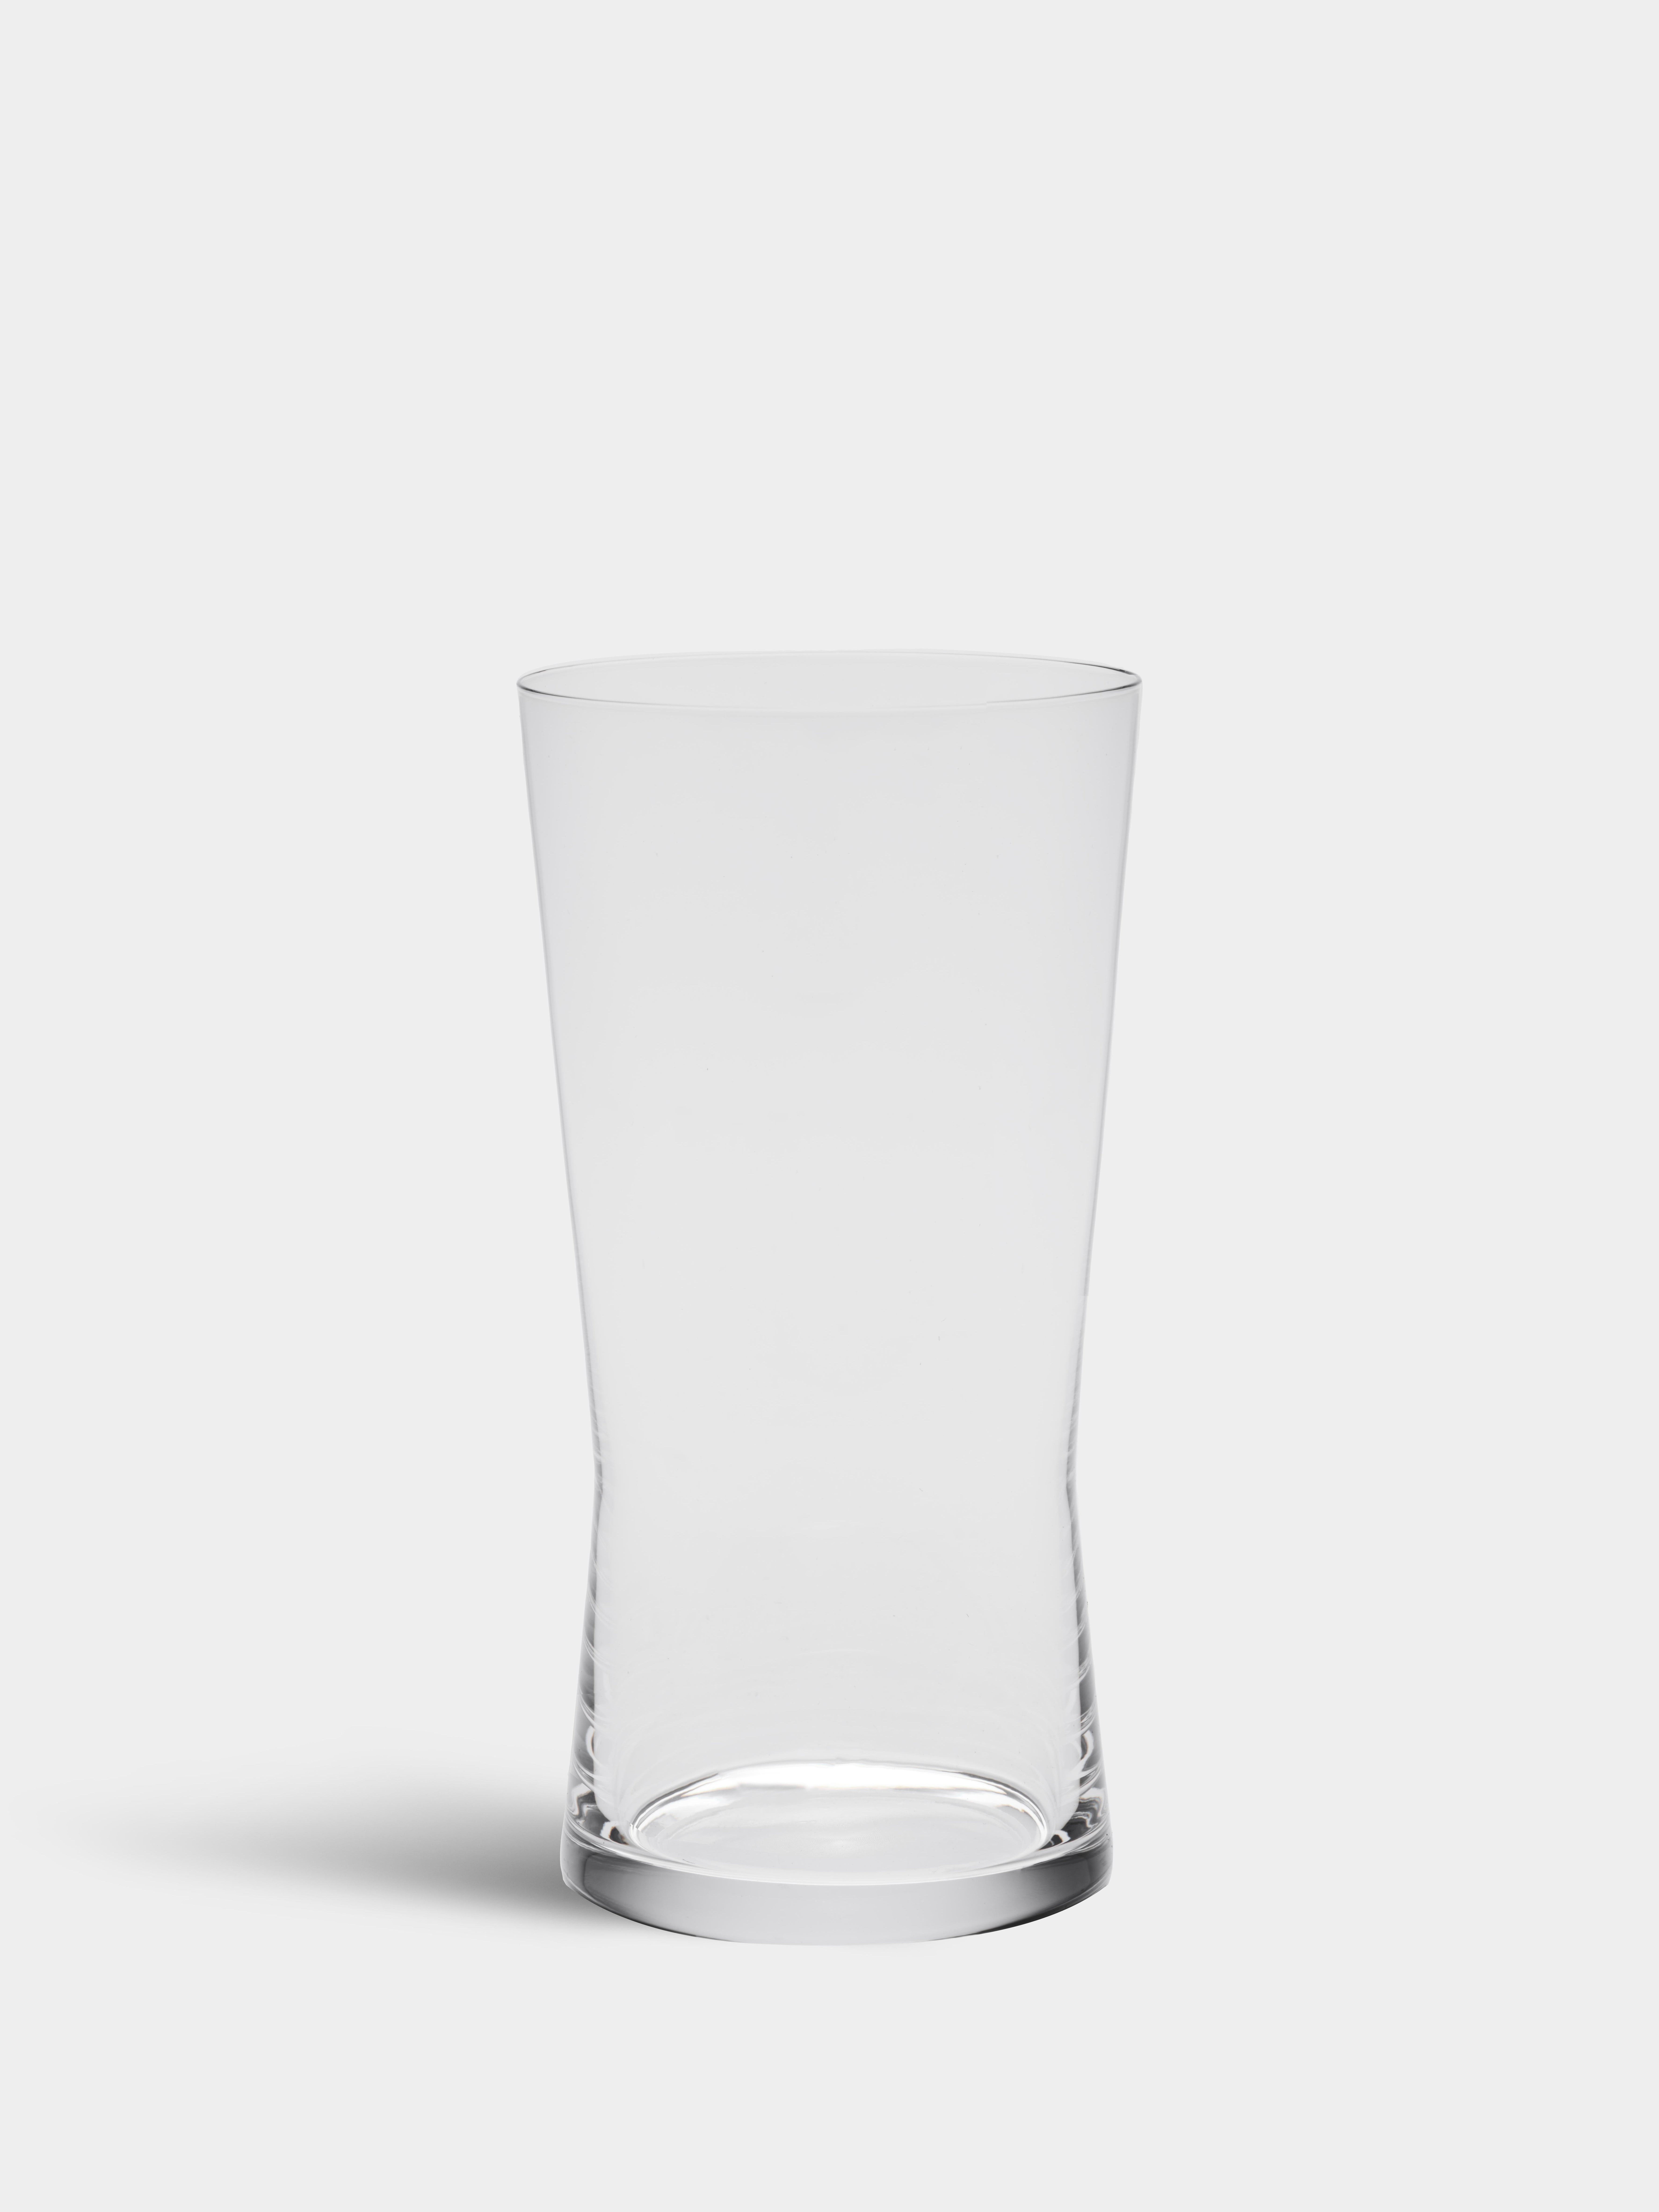 Grace Highball is a glass from Orrefors with a graciously thin rim and with a shape like a classic double cone – designed to fit the hand perfectly. The Highball glass is ideal for serving traditional alcoholic beverages or contemporary cocktails